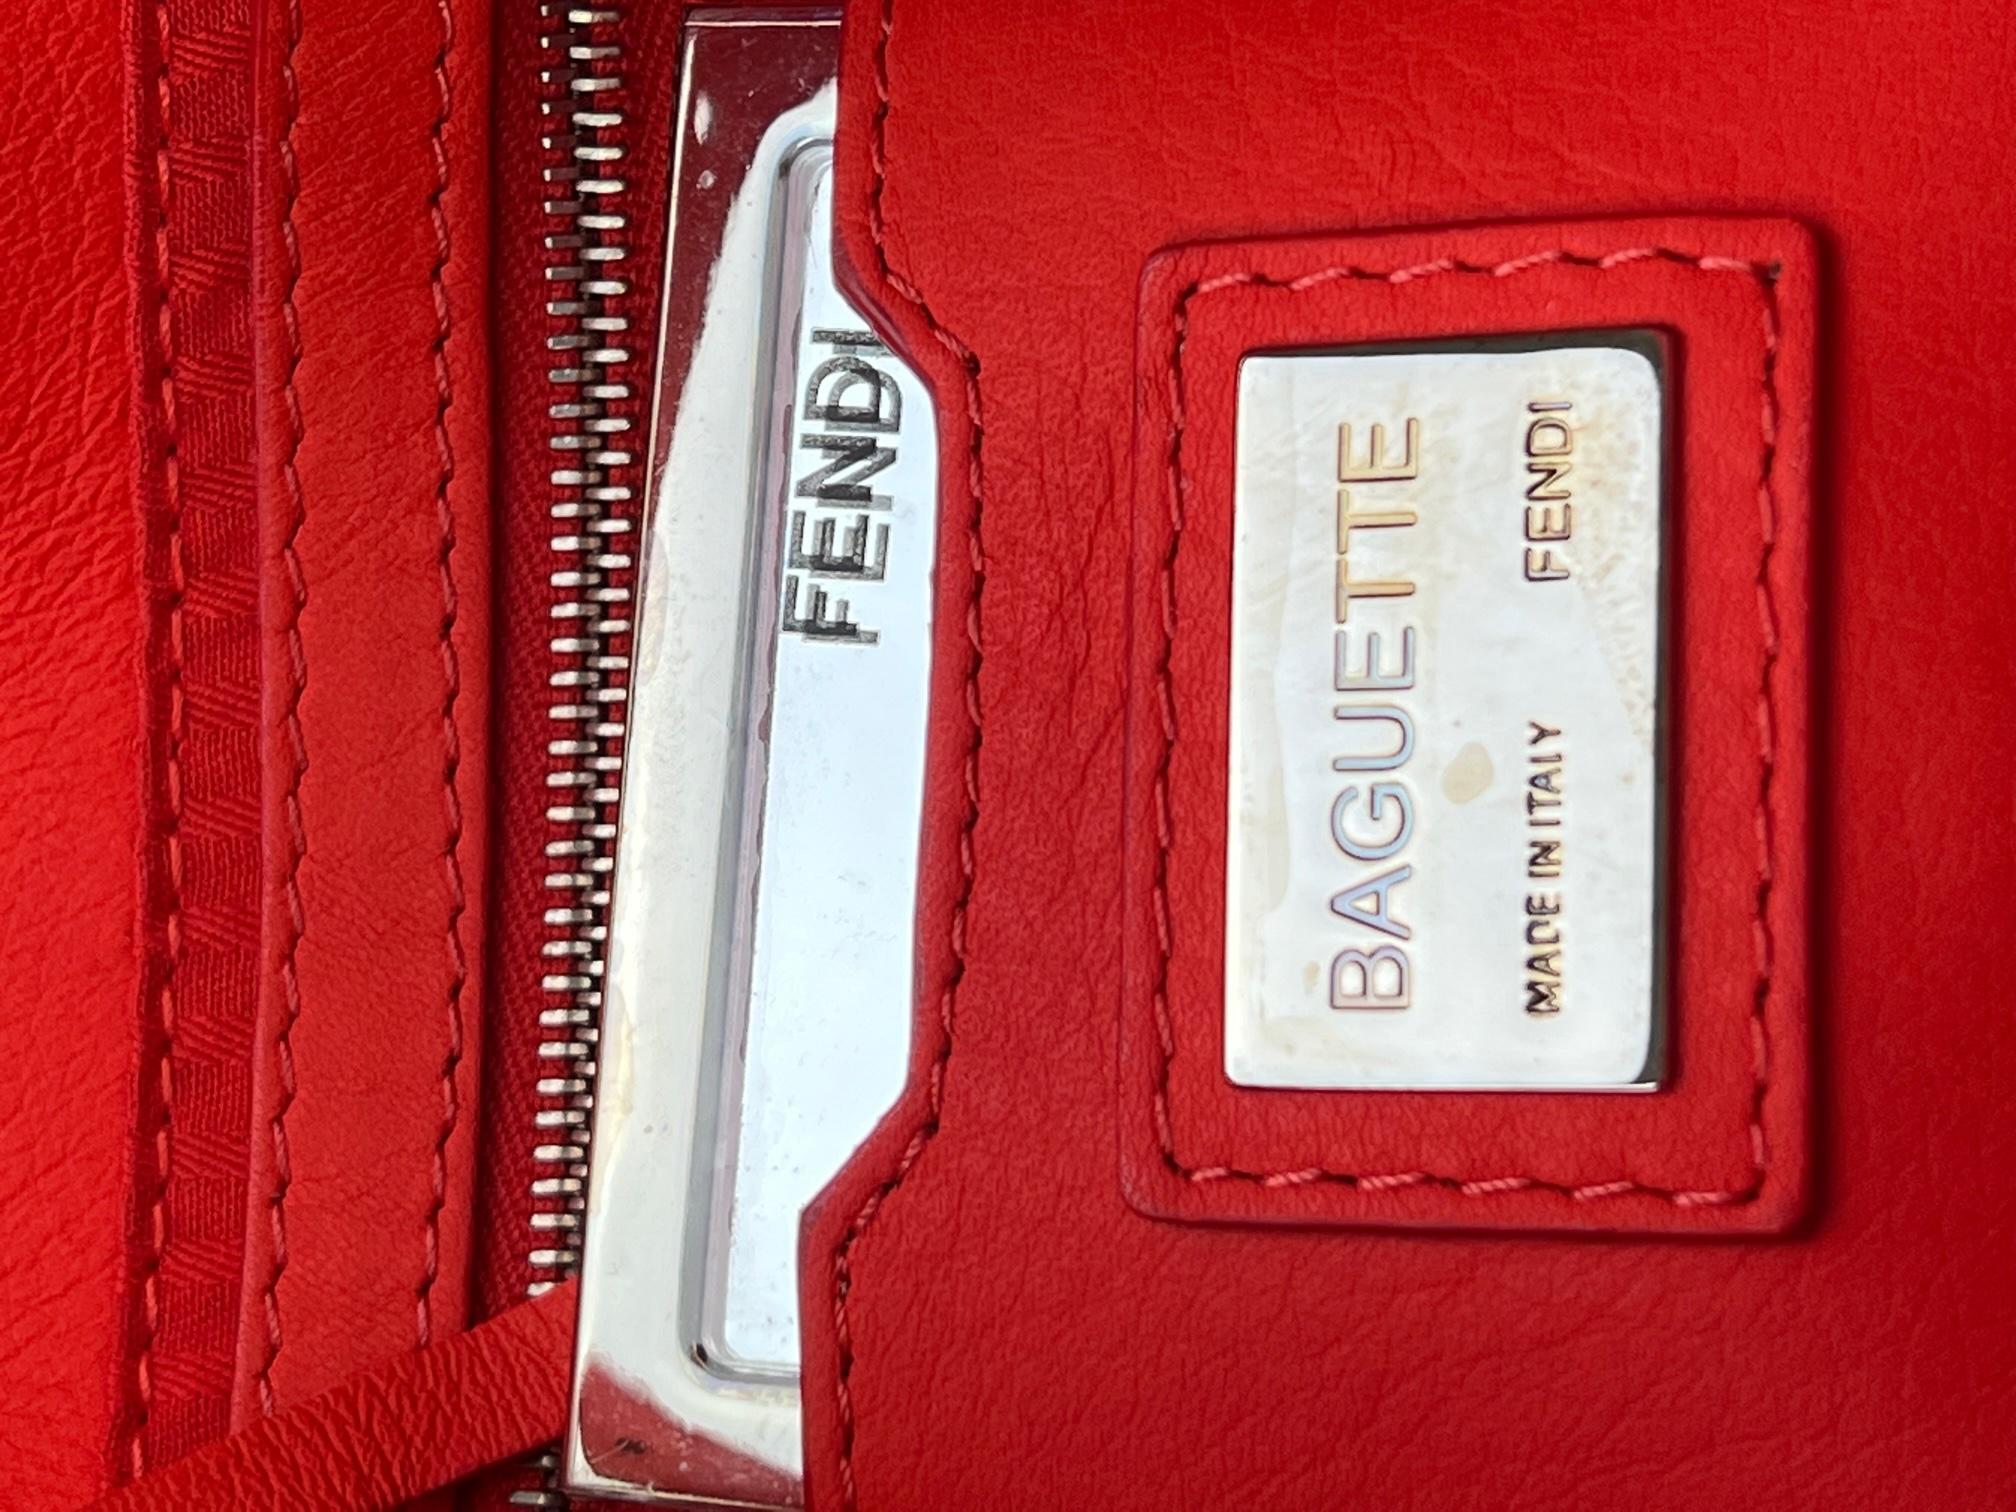 Pre-Owned 100% Authentic
Fendi Vitello Baguette Papavero Bag
RATING: A   excellent, near mint, has little
to no signs of wear
MATERIAL: leather
STRAP: Fendi long adjustable leather
strap 53.5 in long
DROP: 19 in to 24 in
HANDLE: adjustable leather